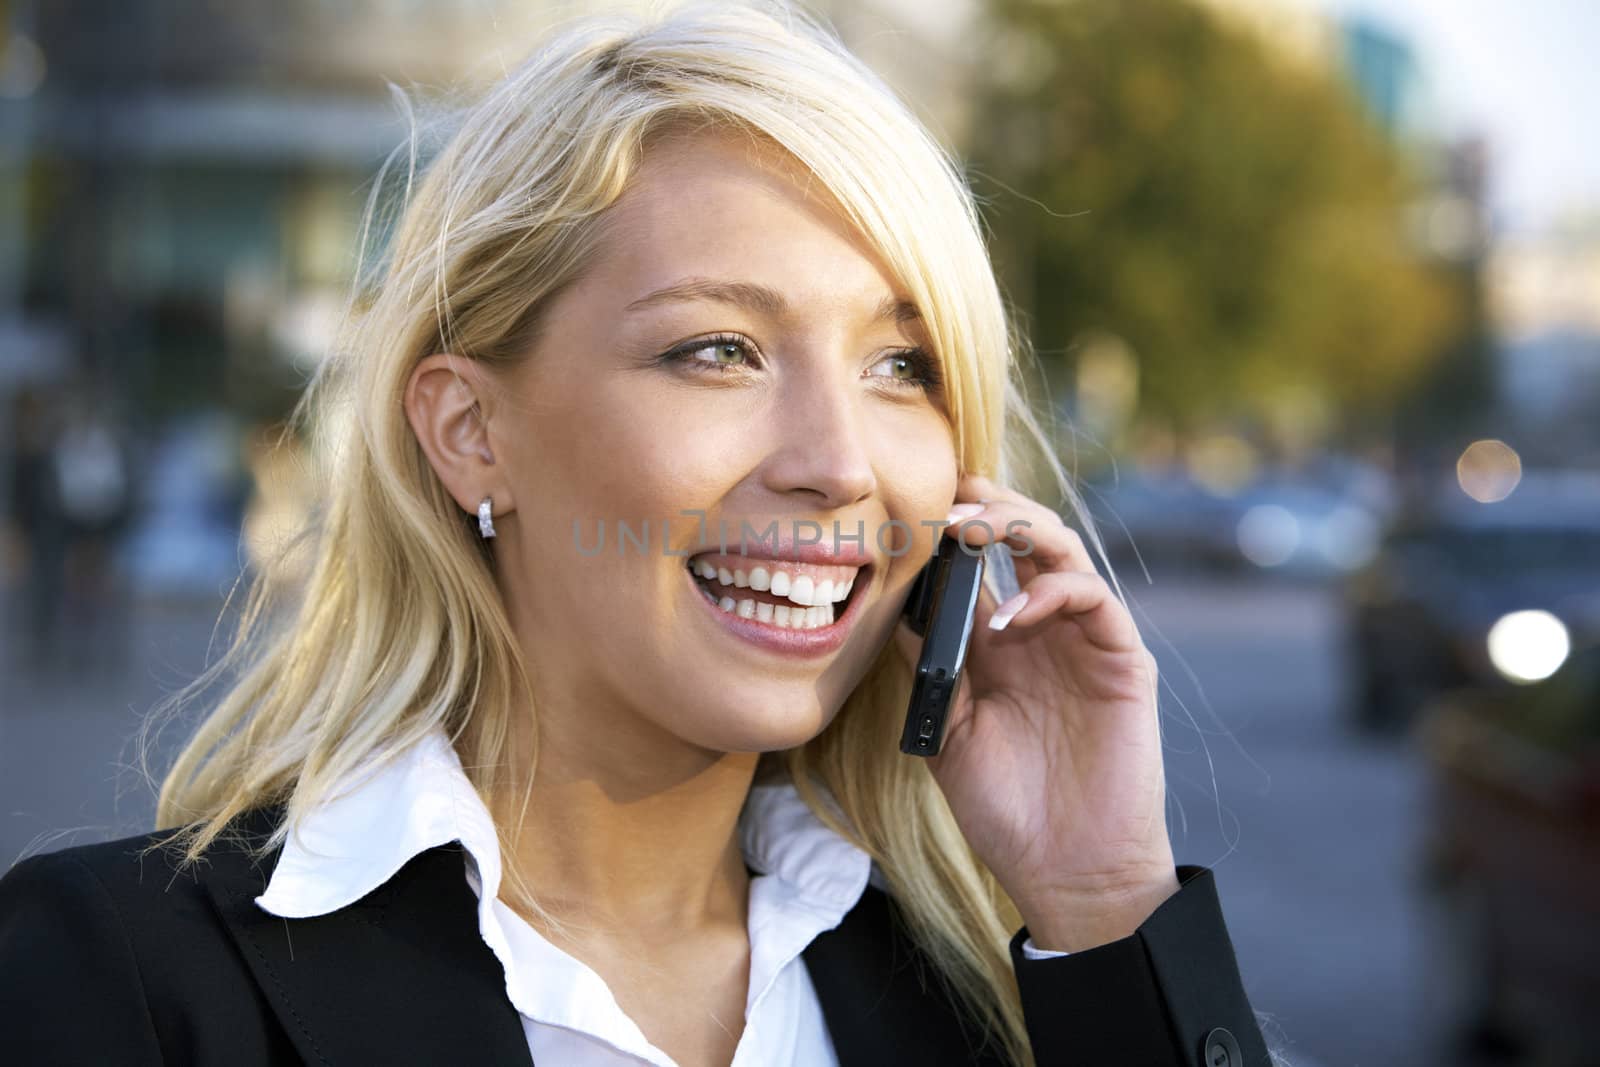 Young businesswoman smiling while using mobile phone in city street